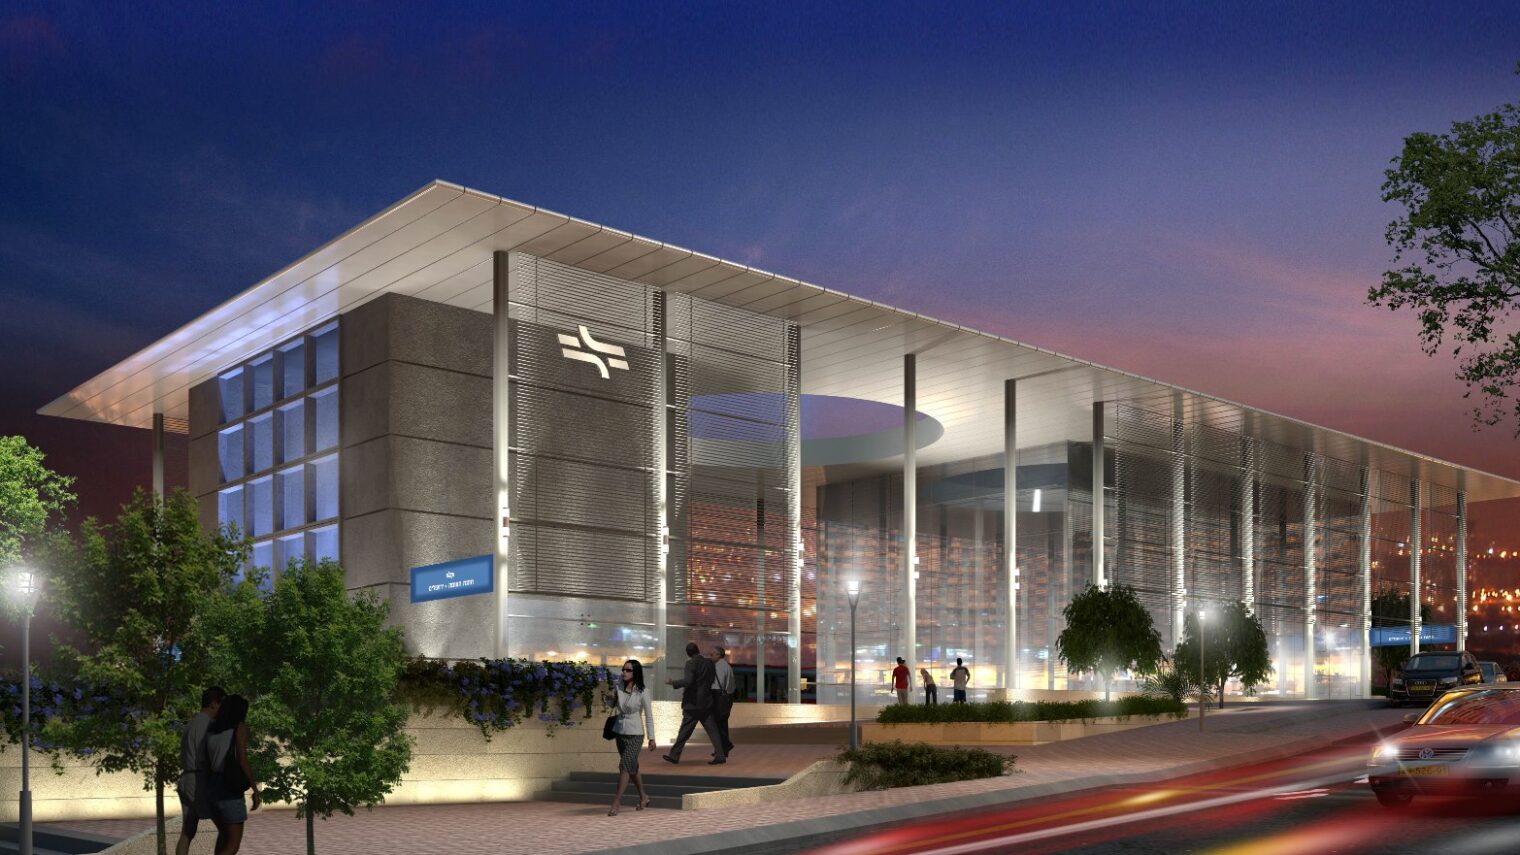 An artist’s rendering of the Jerusalem railroad station set to open in early 2018. Image courtesy of Israel Railways